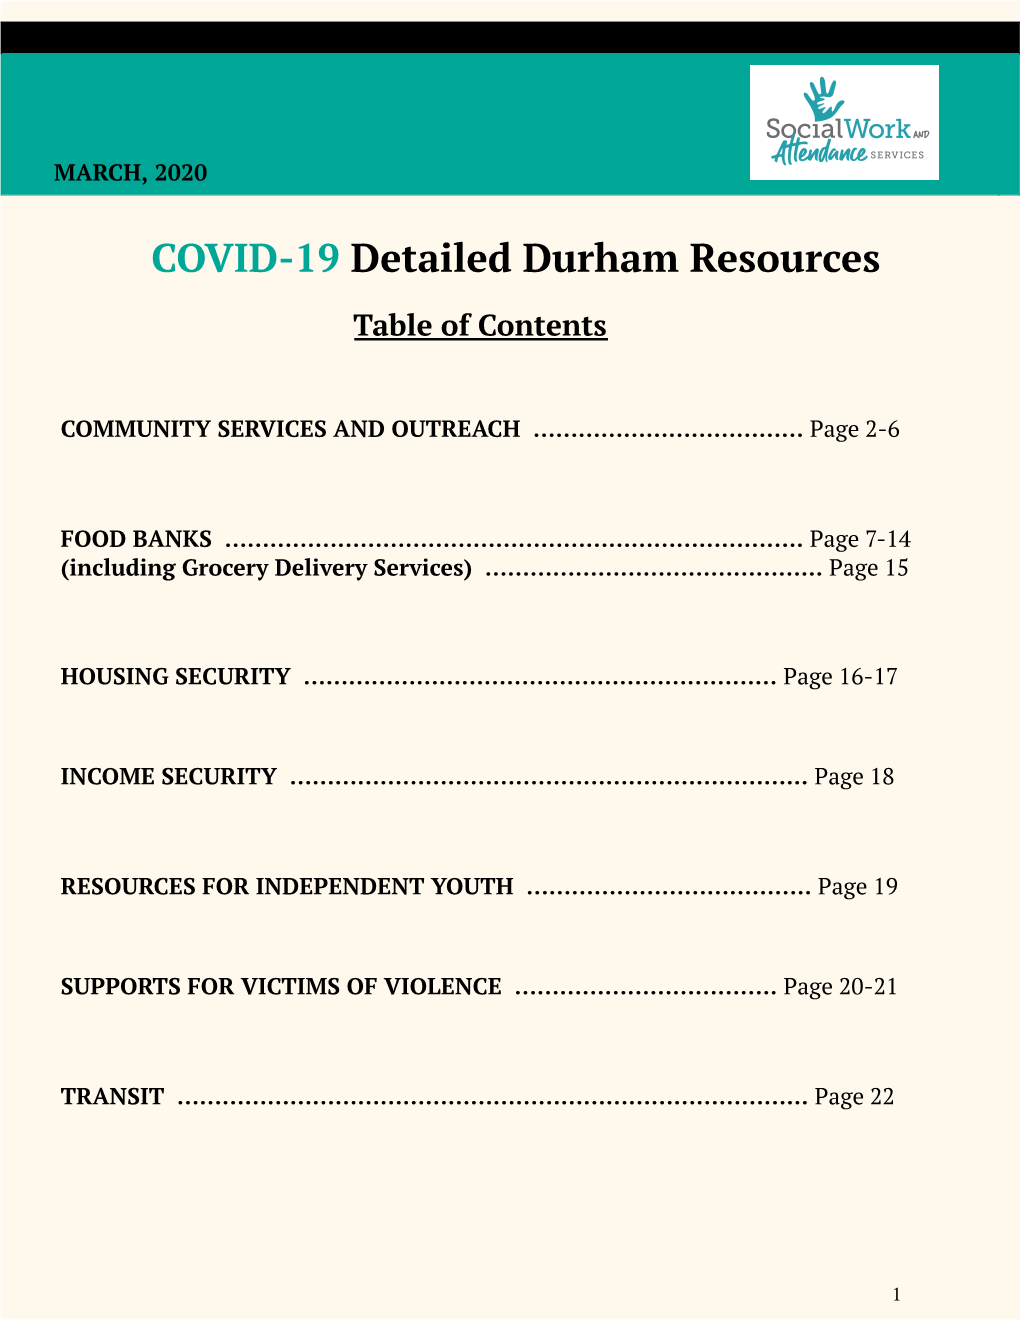 COVID-19 Detailed Durham Resources